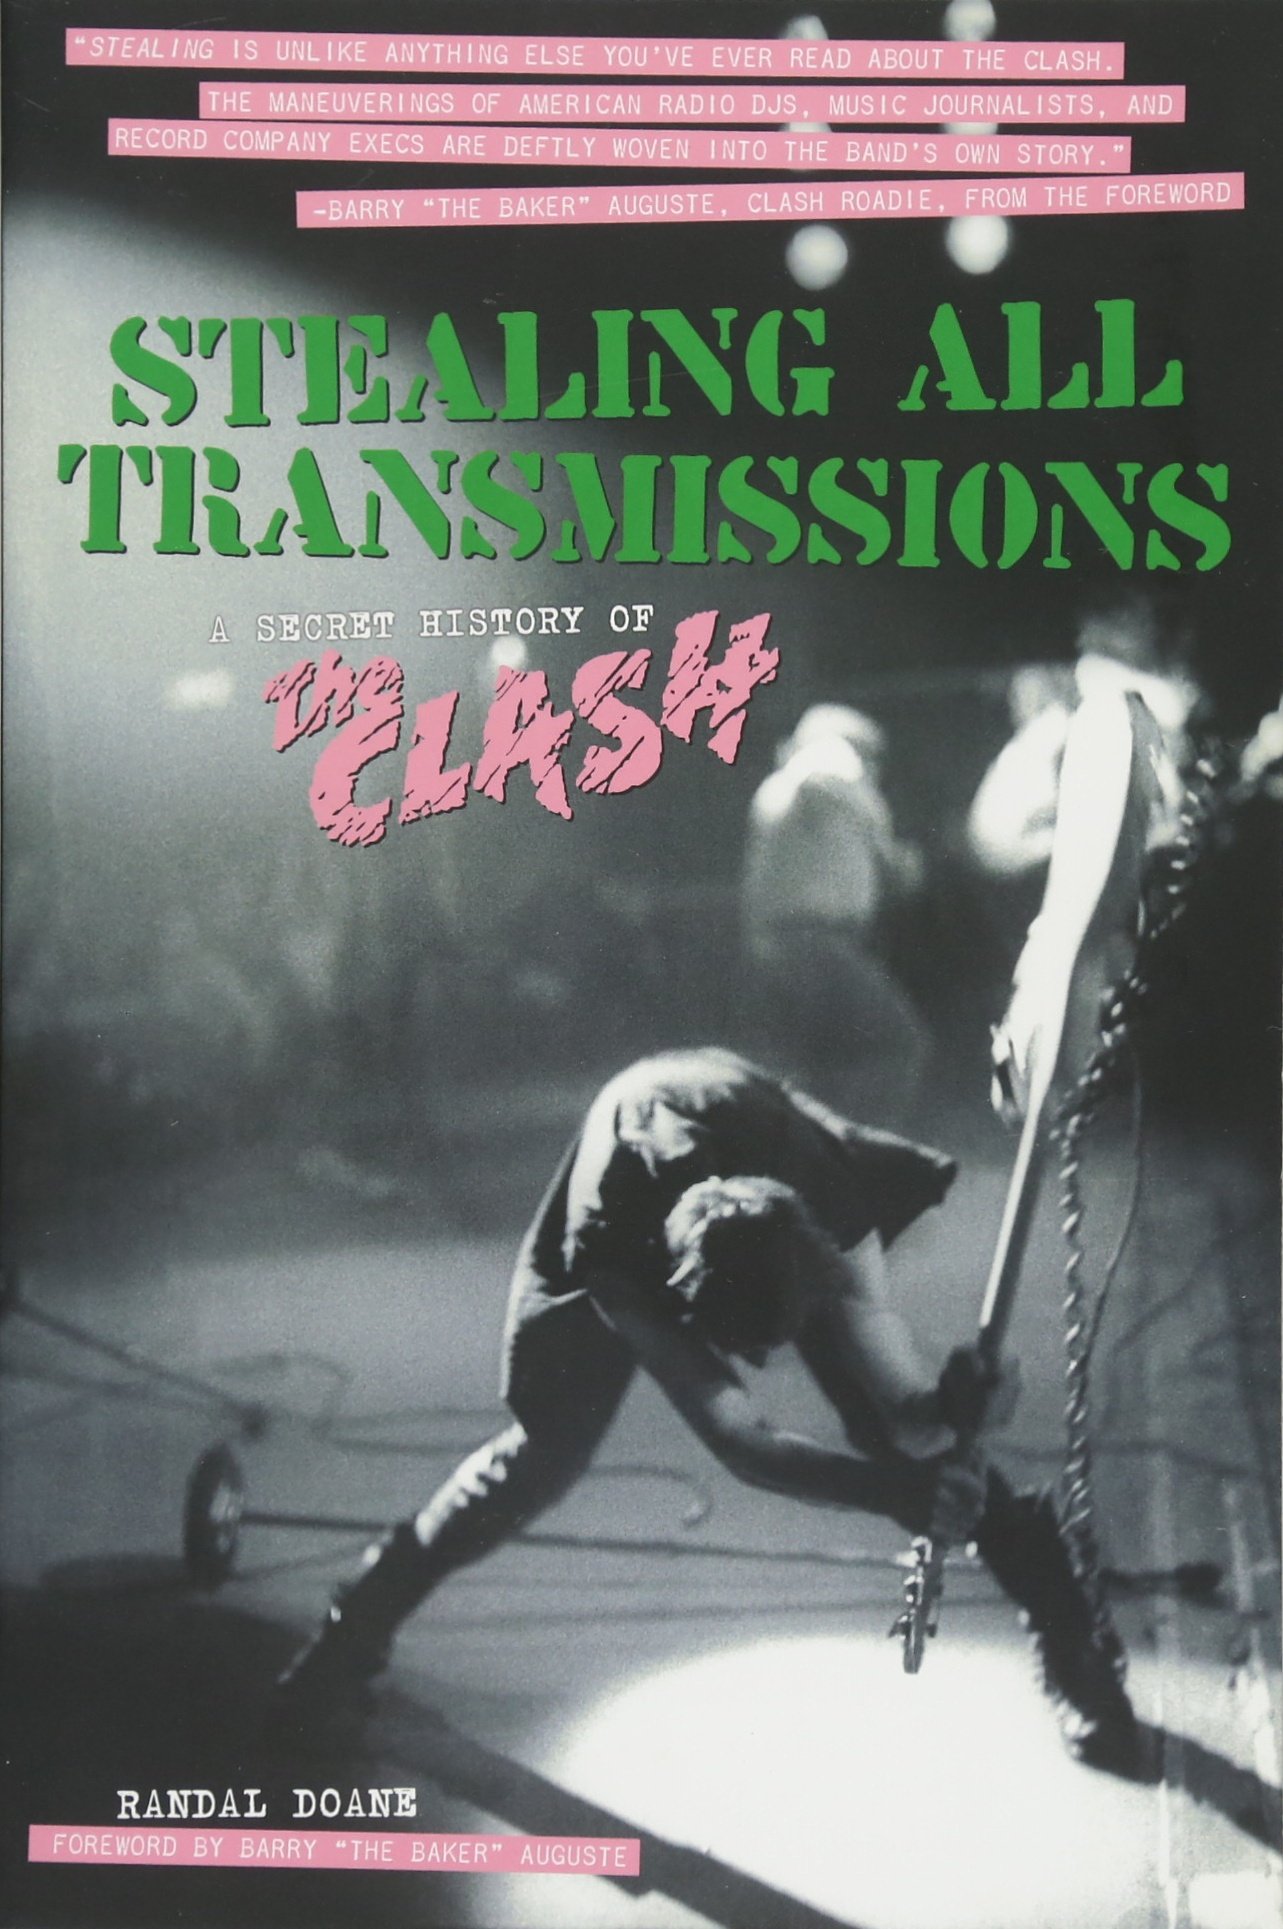 Stealing All Transmissions: A Secret History of the Clash. Randal Doane